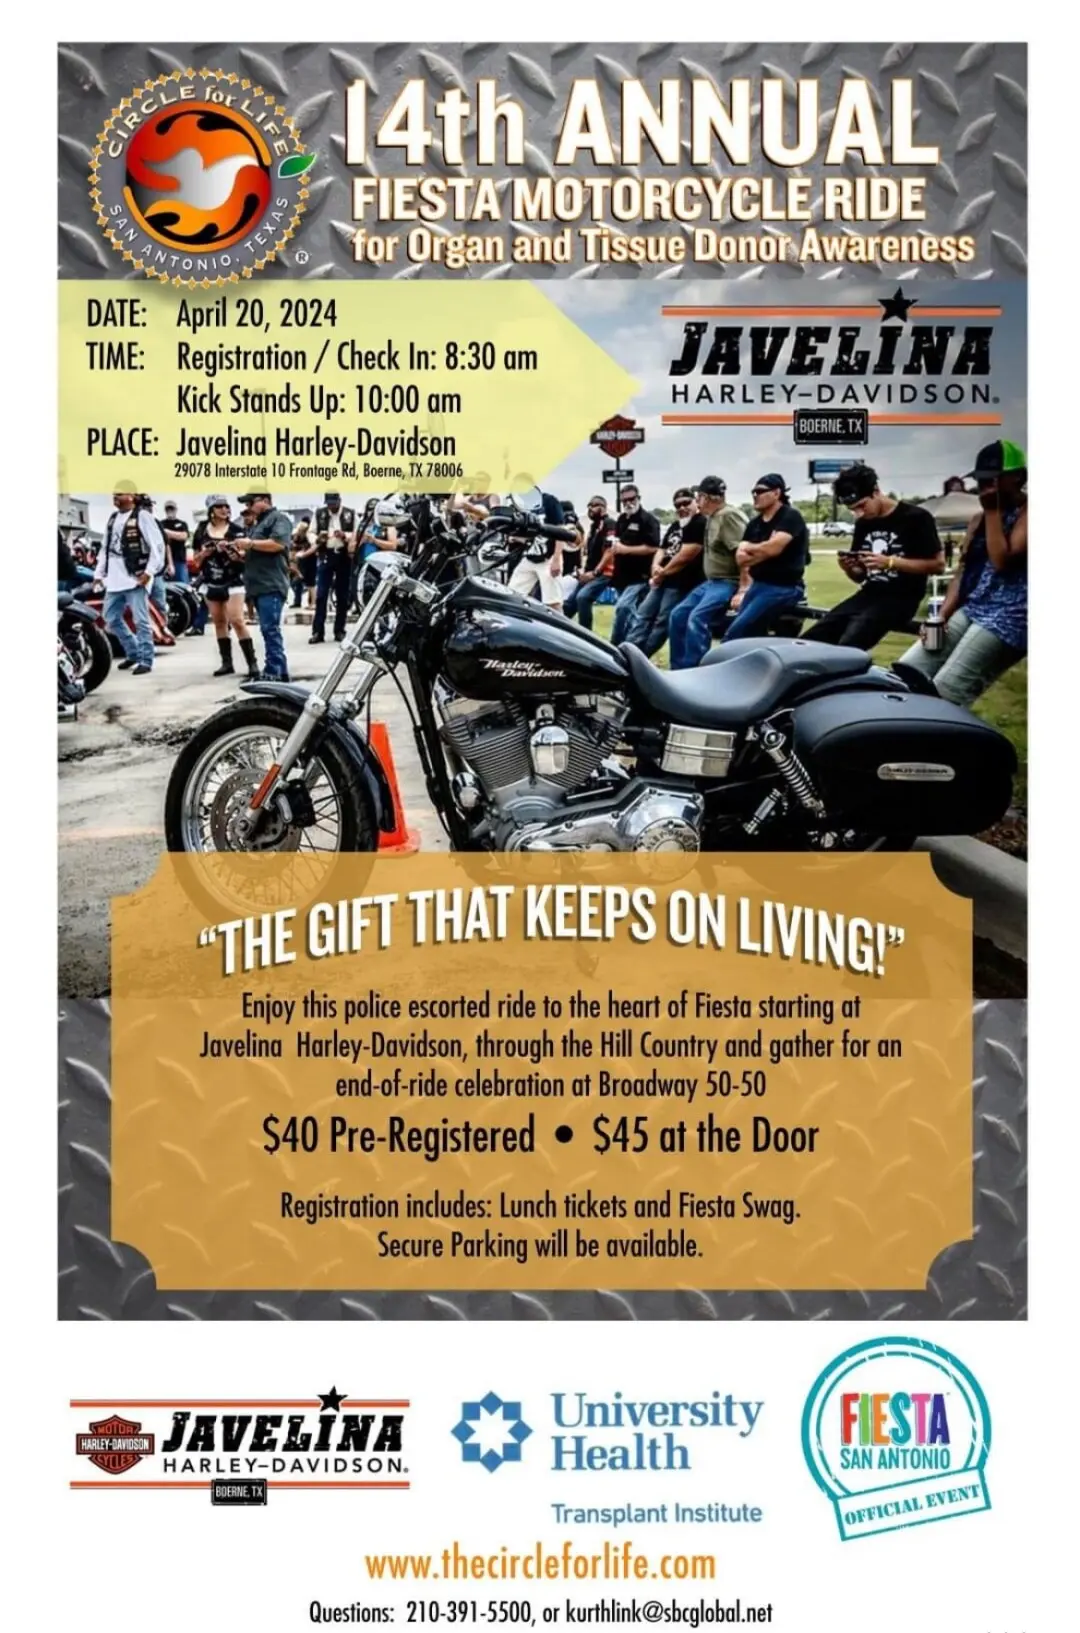 14th ANNUAL FIESTA MOTORCYCLE RIDE